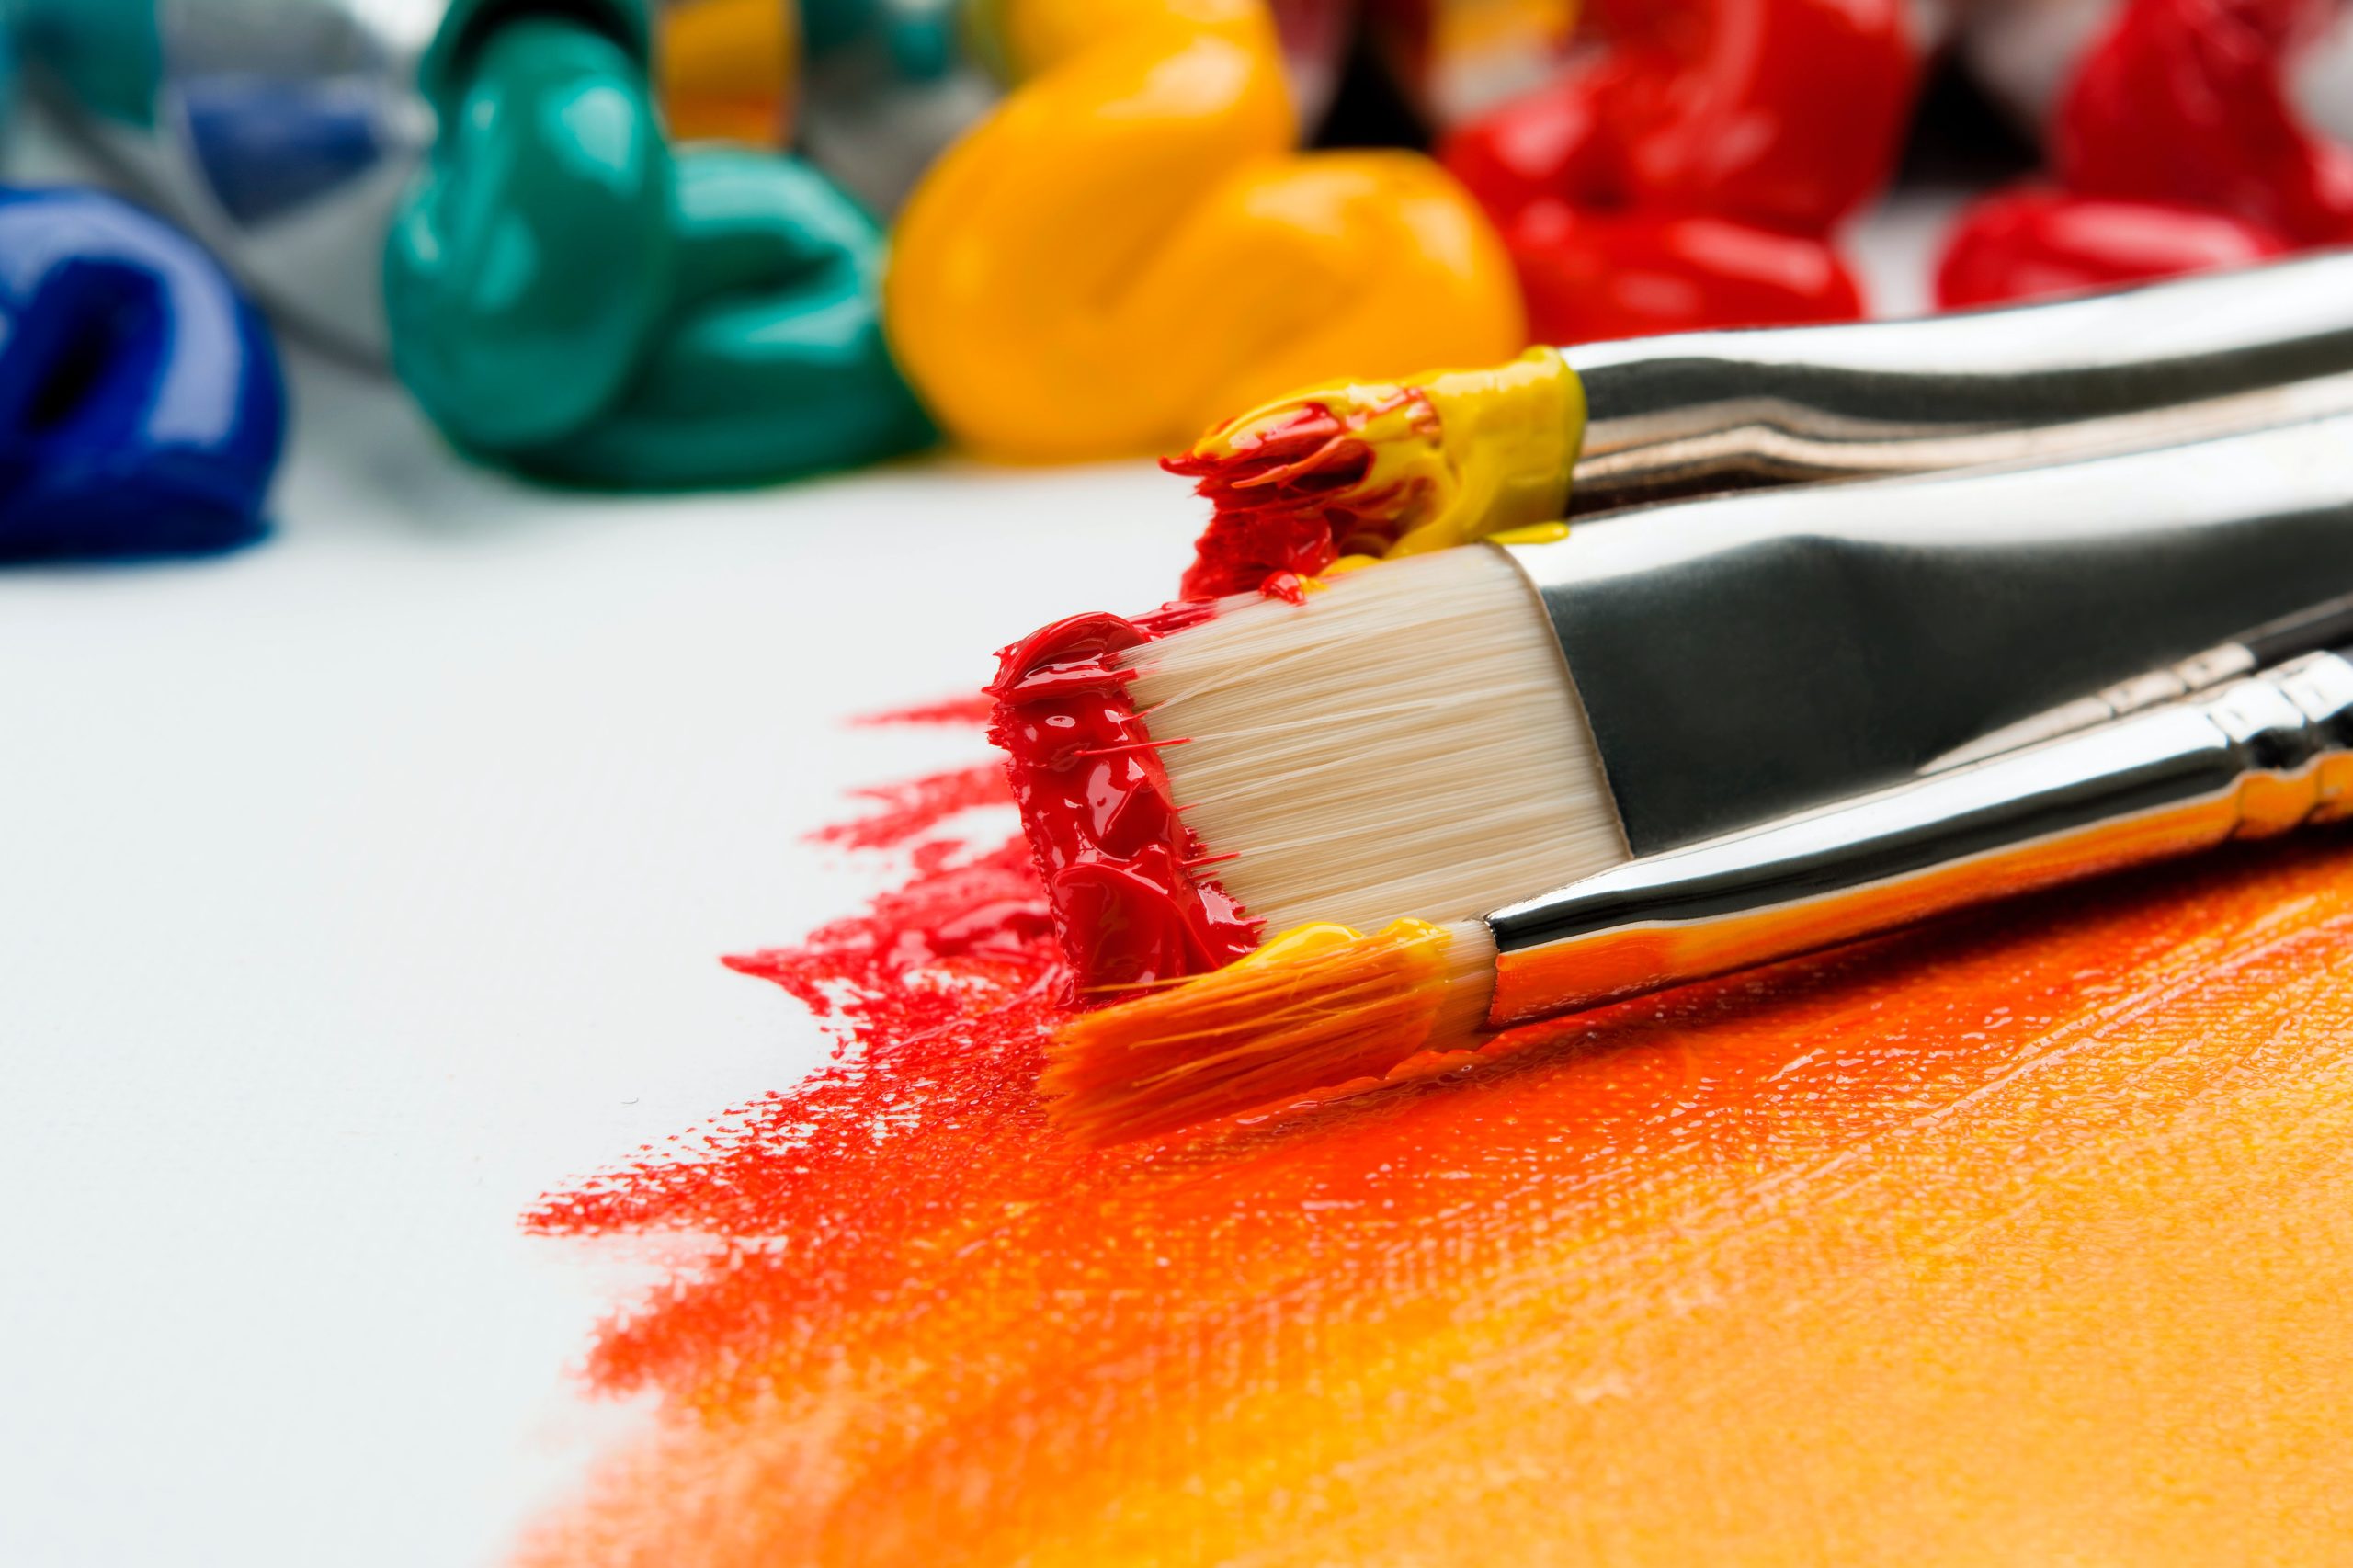 paintbrushes with red and orange paint lying on canvas partially painted